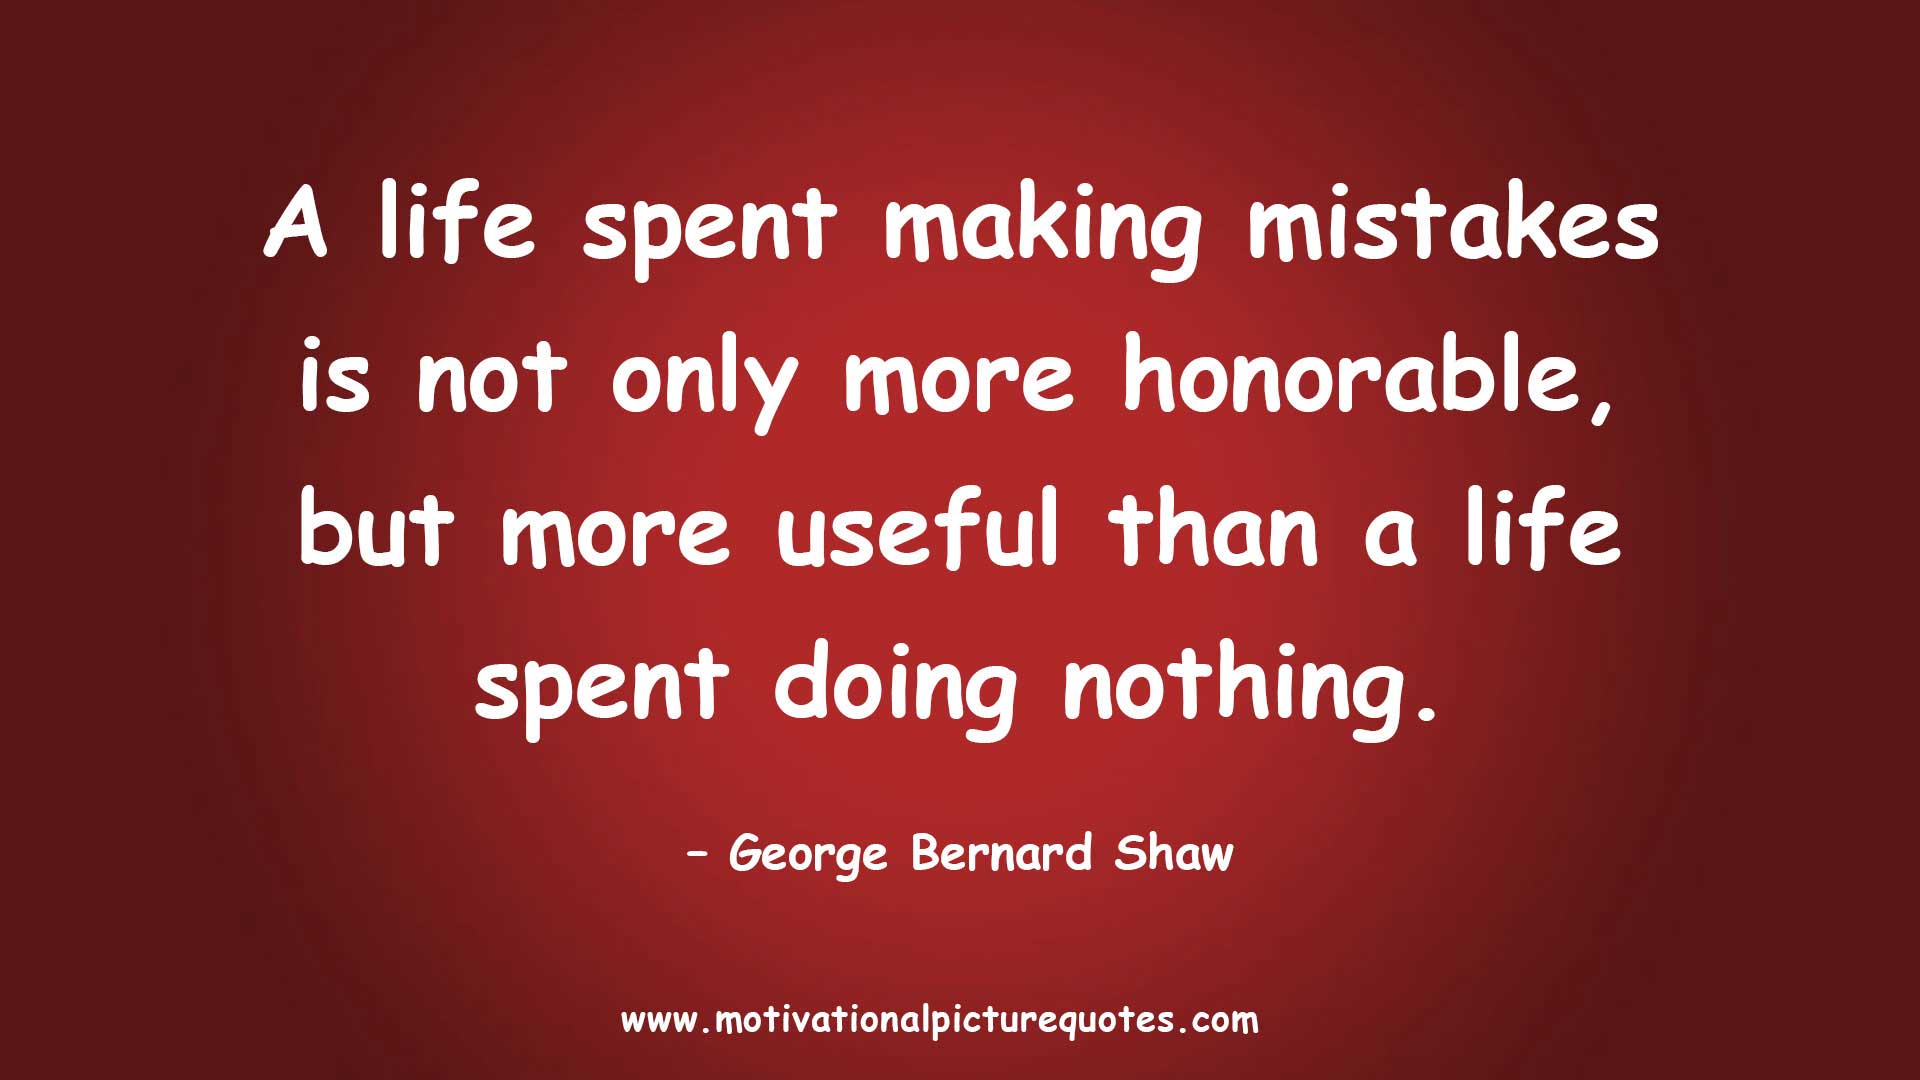 Sayings about mistakes. A Life spent making mistakes is not only more Honorable, but more useful than a Life spent doing nothing.. Mistakes Motivation. Motivation sayings about mistakes. Did you make mistakes